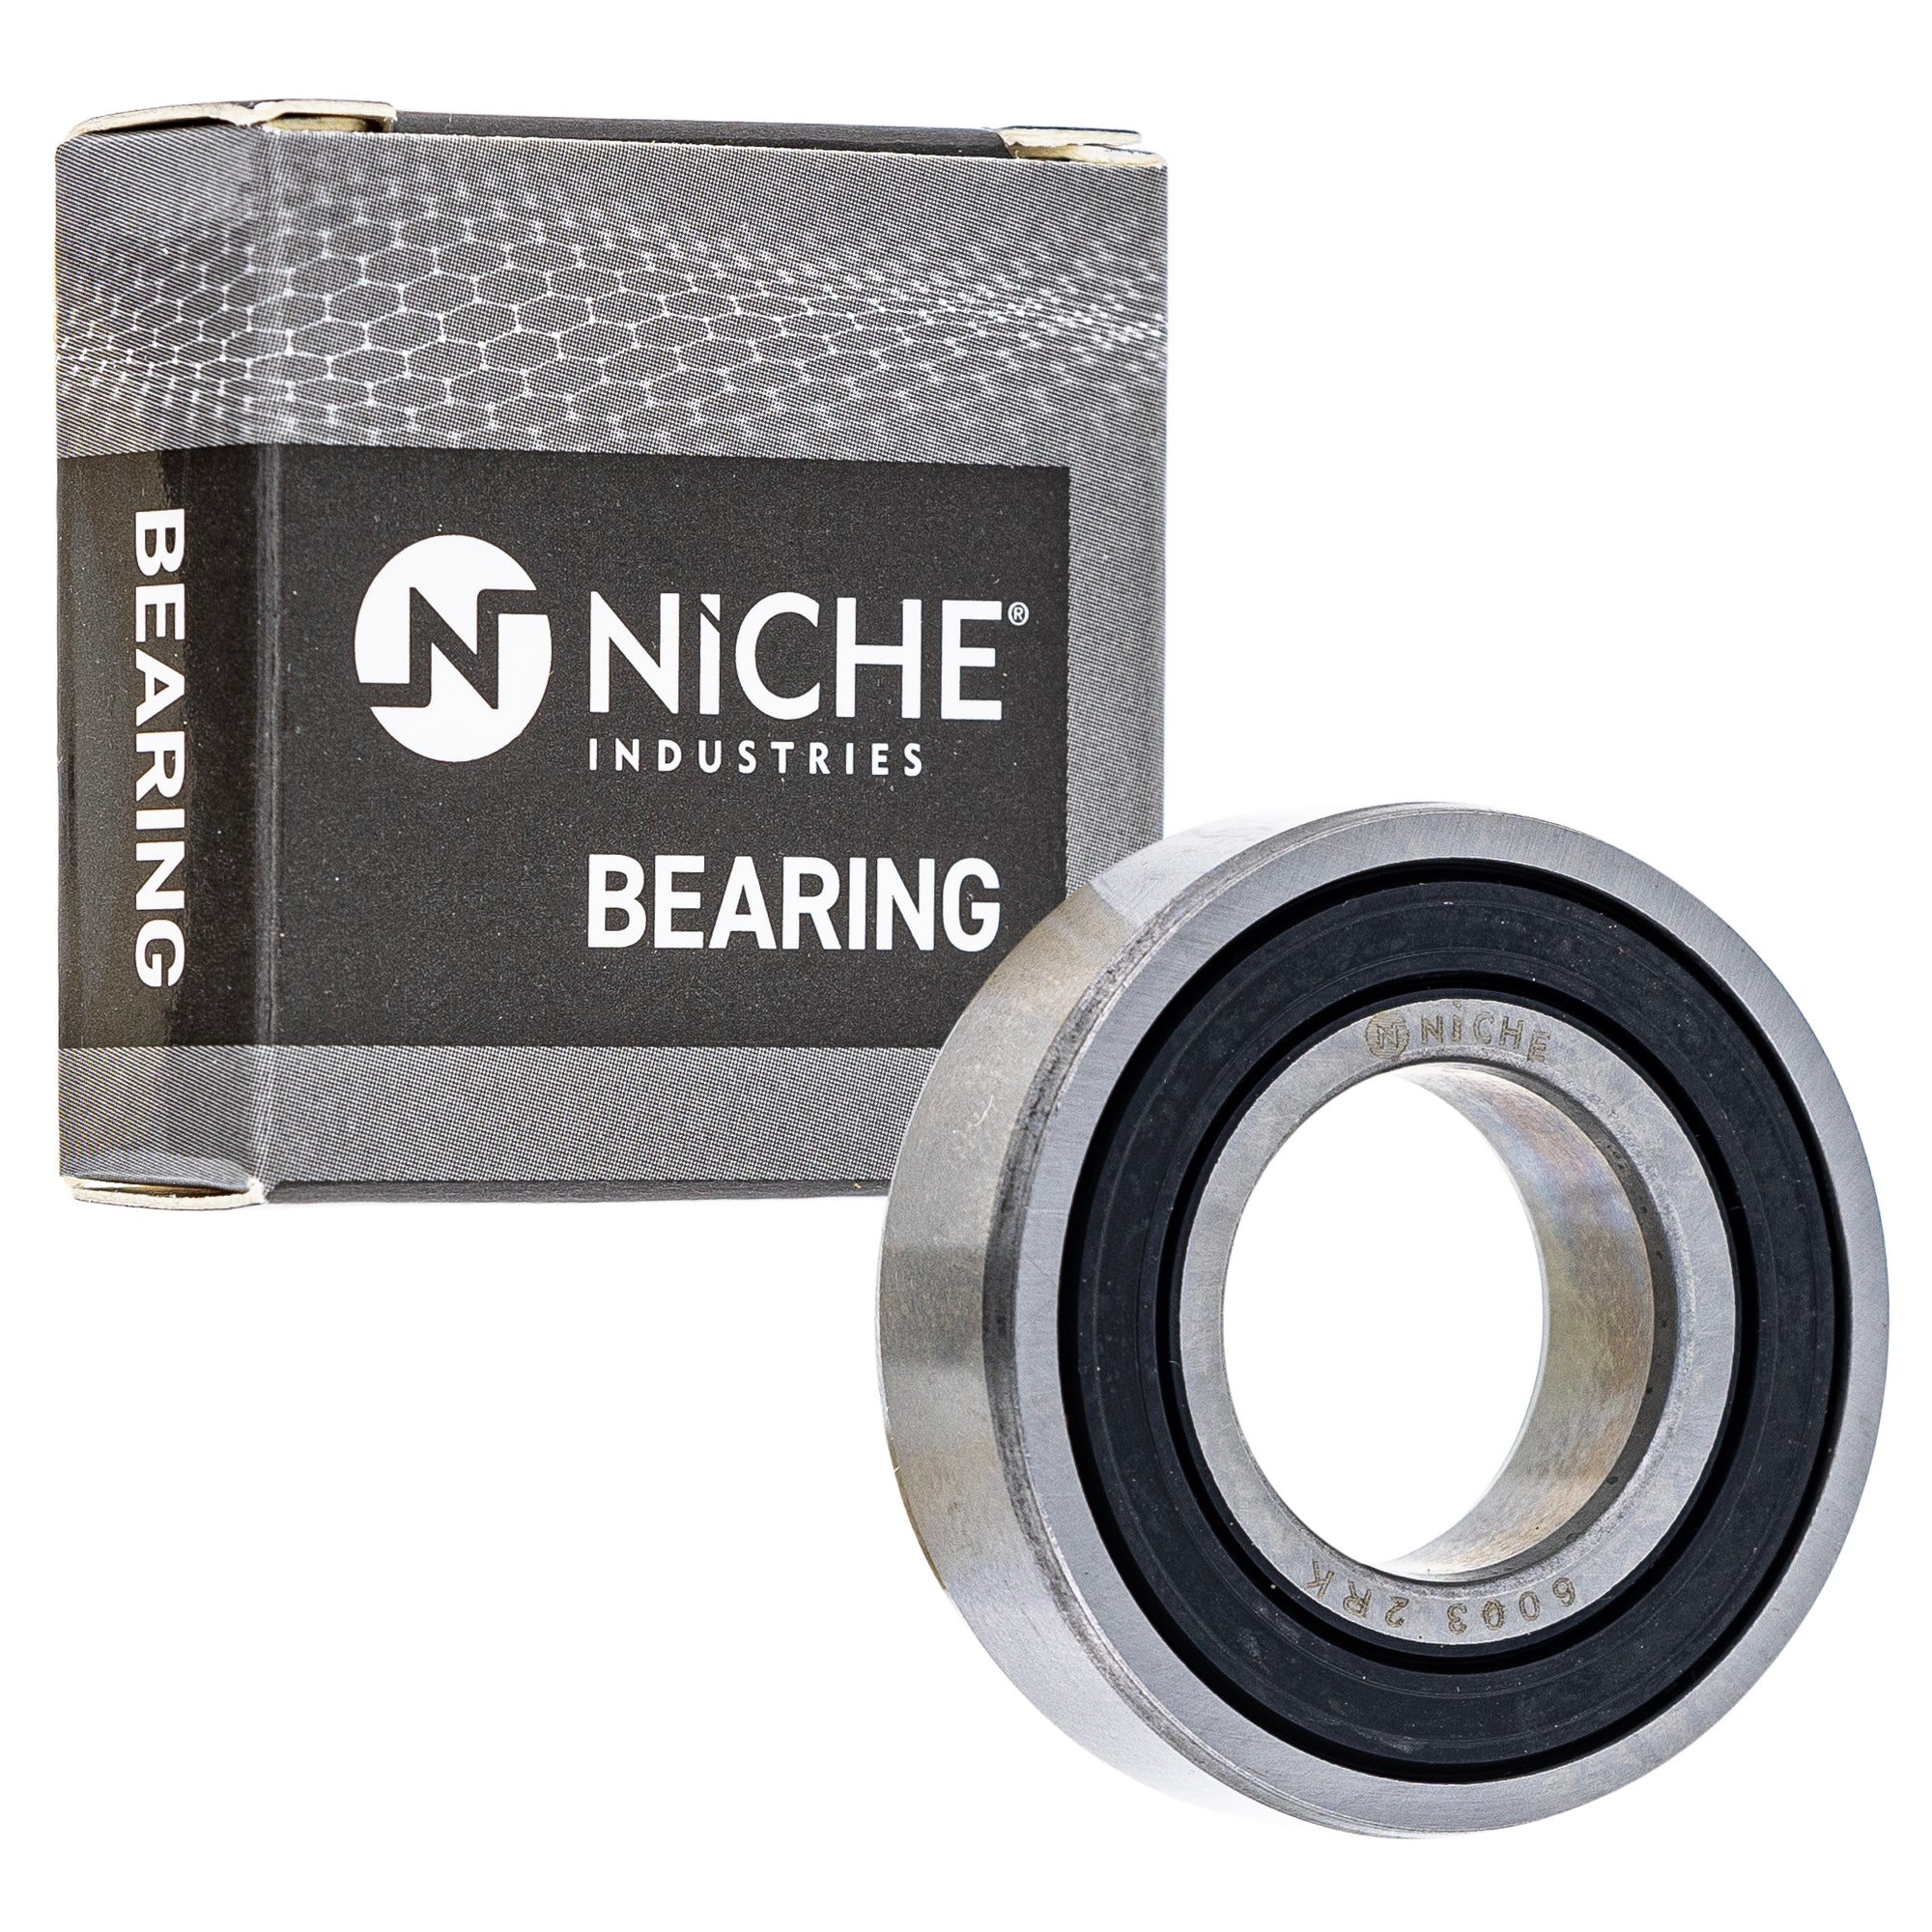 NICHE 519-CBB2325R Bearing for zOTHER Arctic Cat Textron YZ250 YZ125